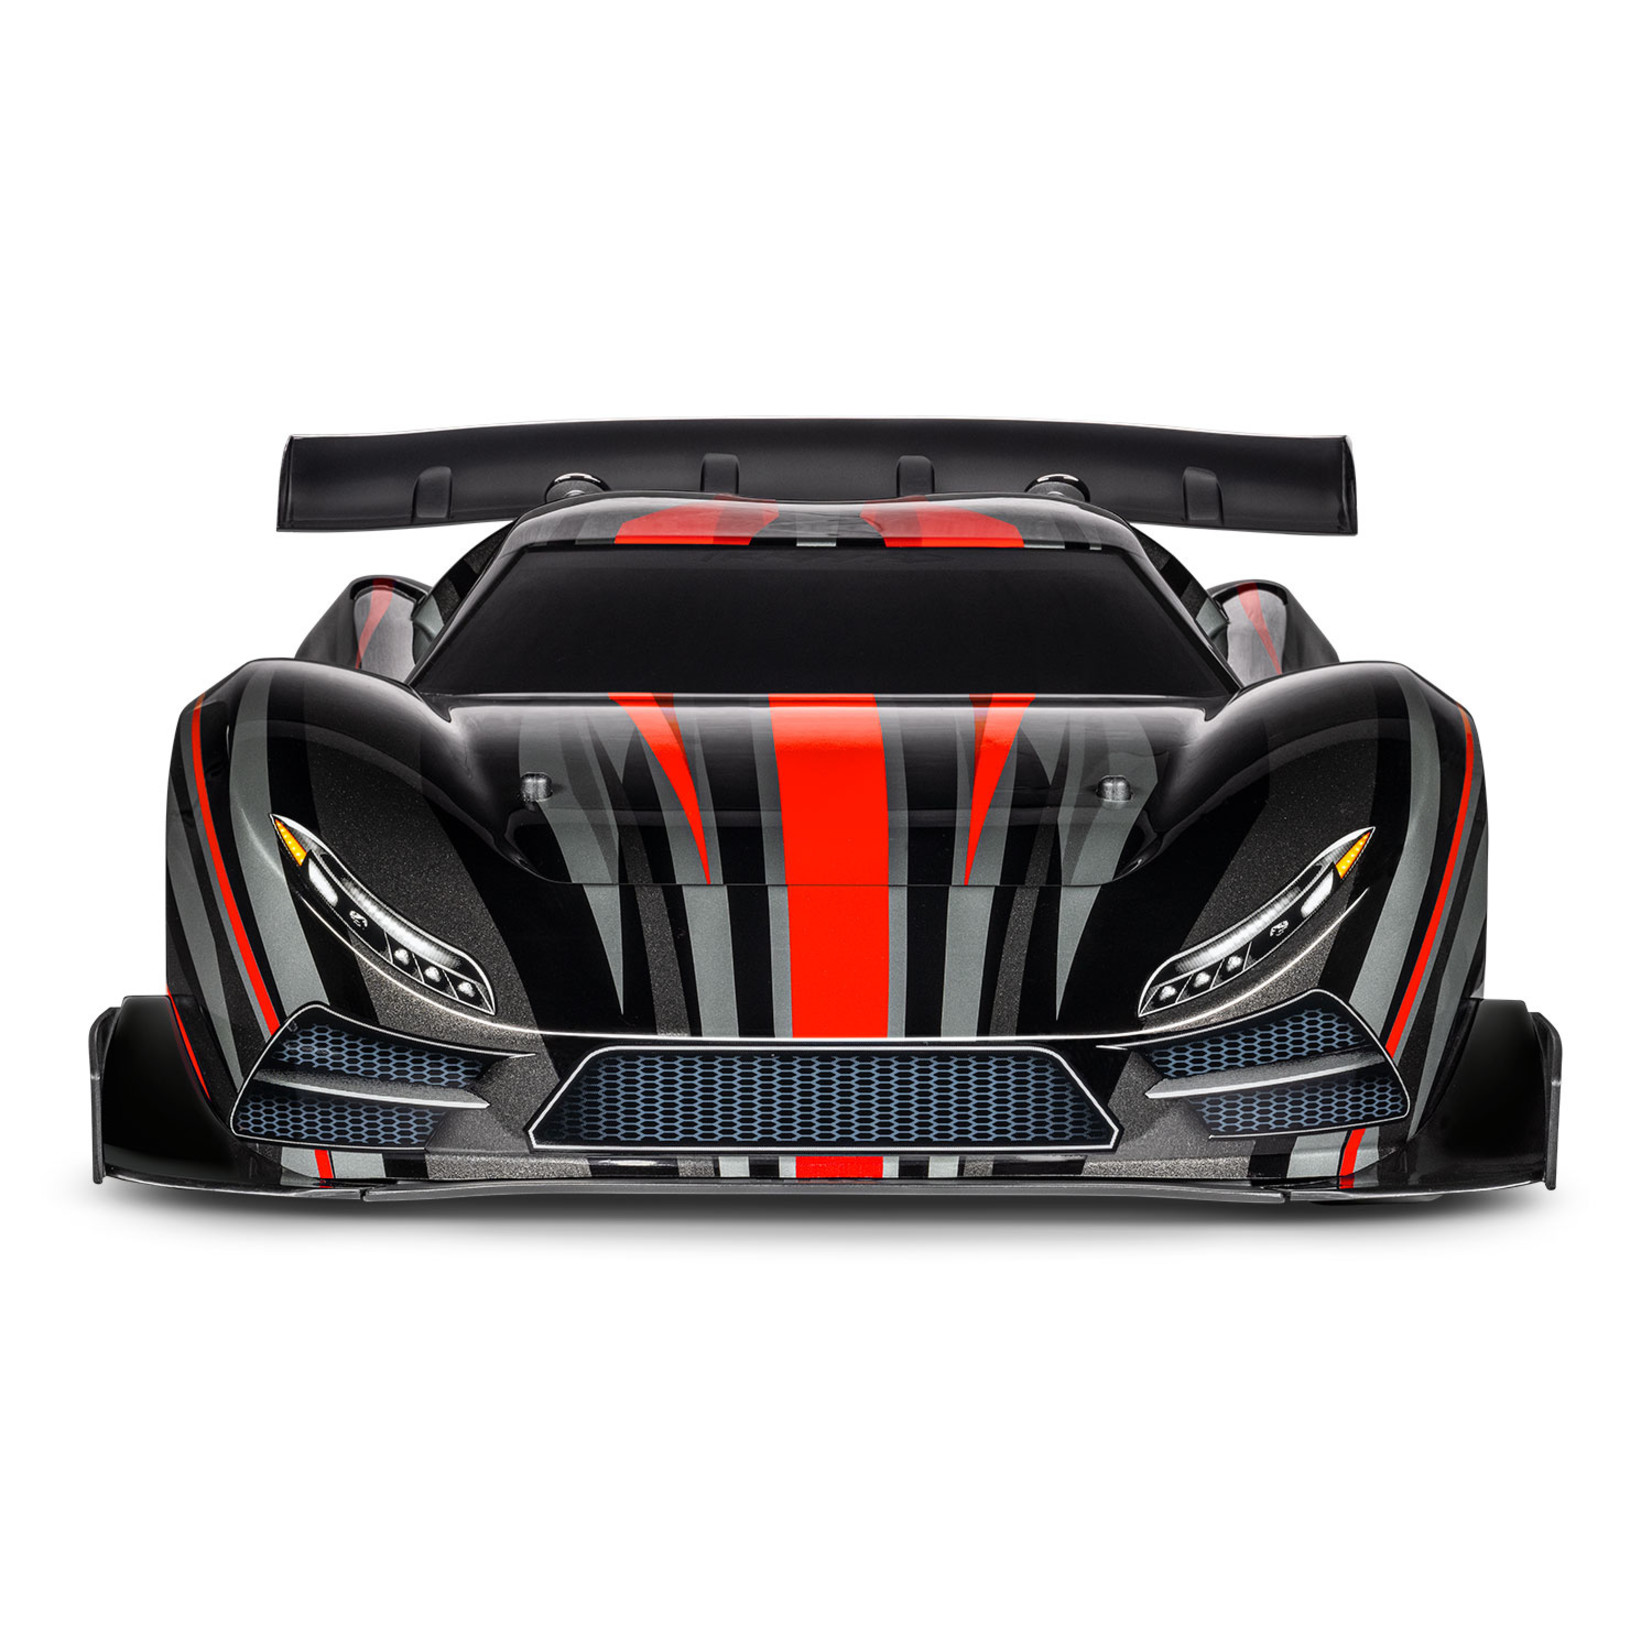 XO-1: 1/7 Scale AWD Supercar with Traxxas Stability Management